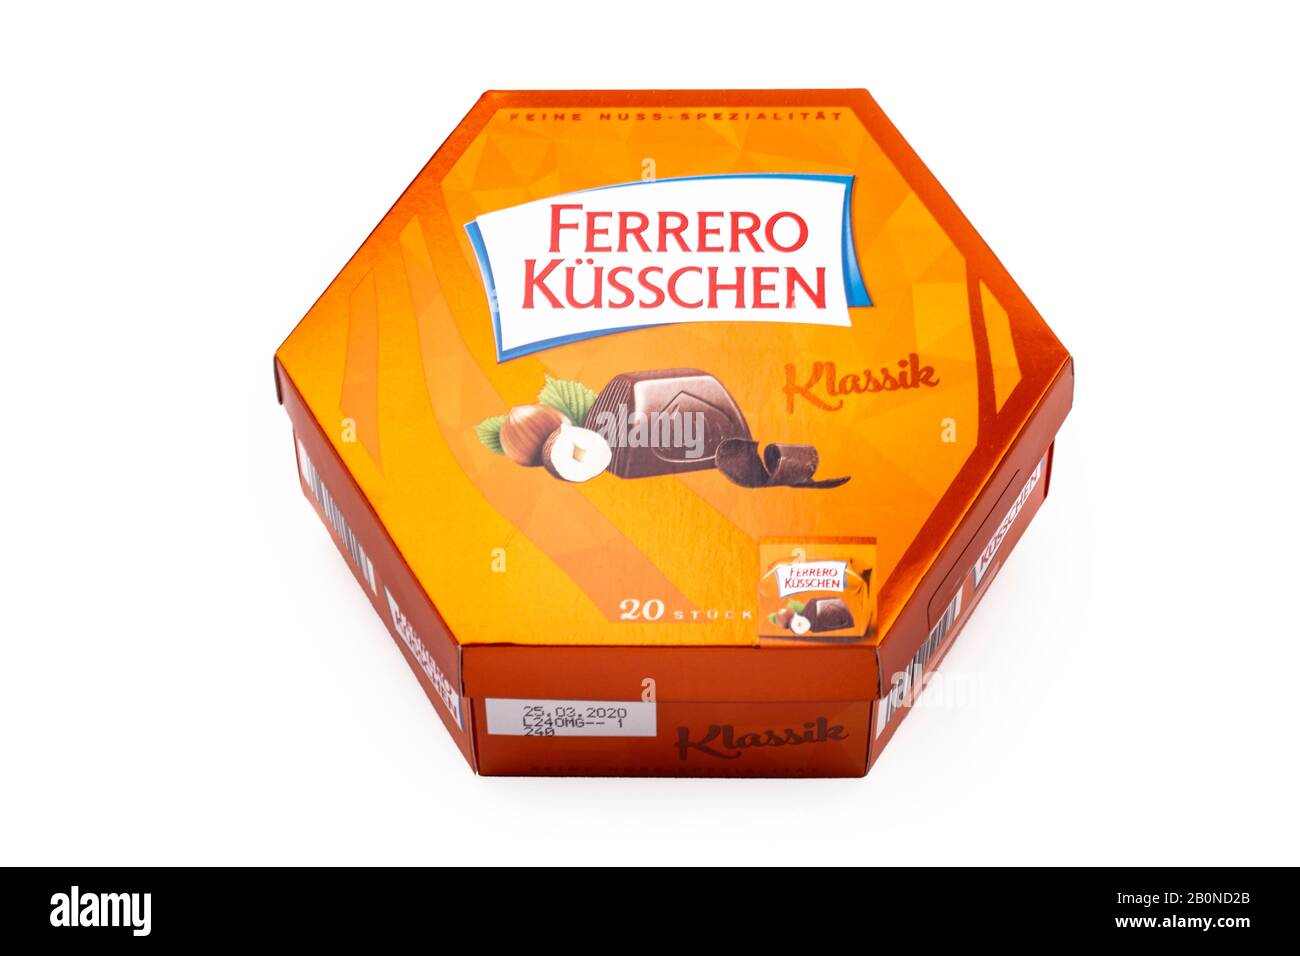 Kuesschen High Resolution Stock Photography and Images - Alamy